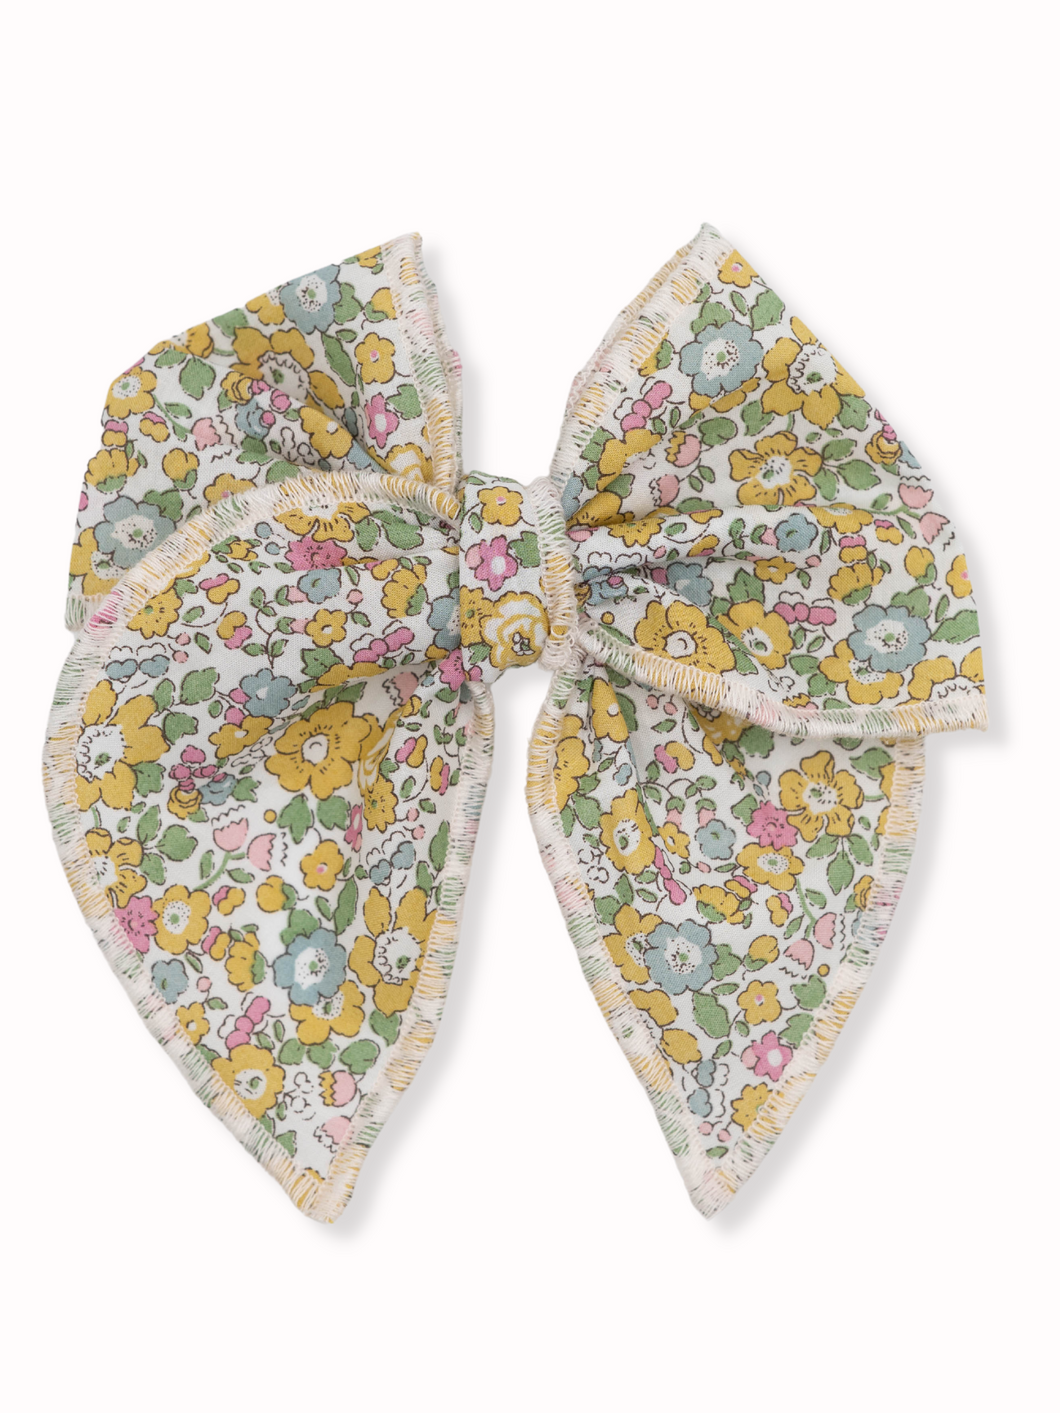 Liberty of London Fable Bow, Large Bow, Classic Bow, 